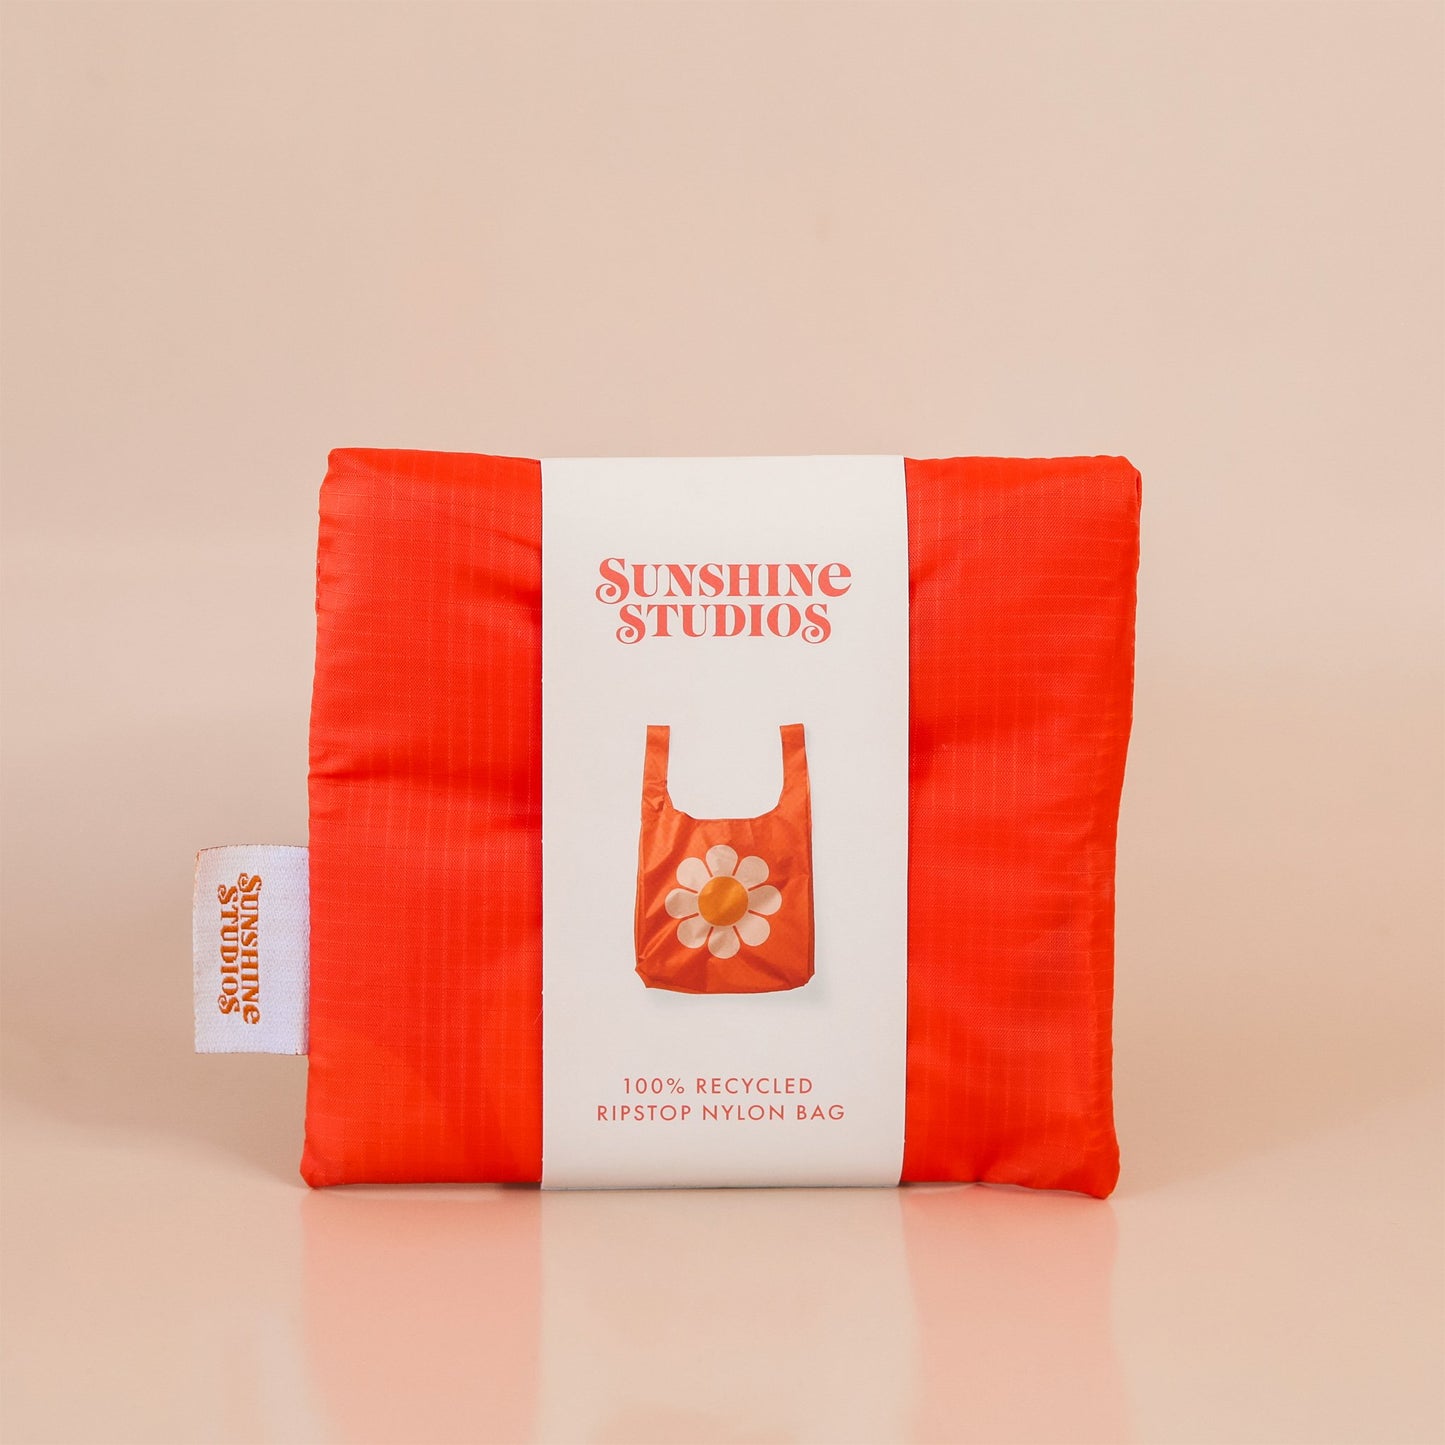 Red-orange reusable bag folded tightly into a square. The bag is wrapped in a white band that reads ’sunshine studios'. Under the text is a picture of the reusable bag. On the left side of the bag is a white tag with bright orange text that reads ’sunshine studios.' 